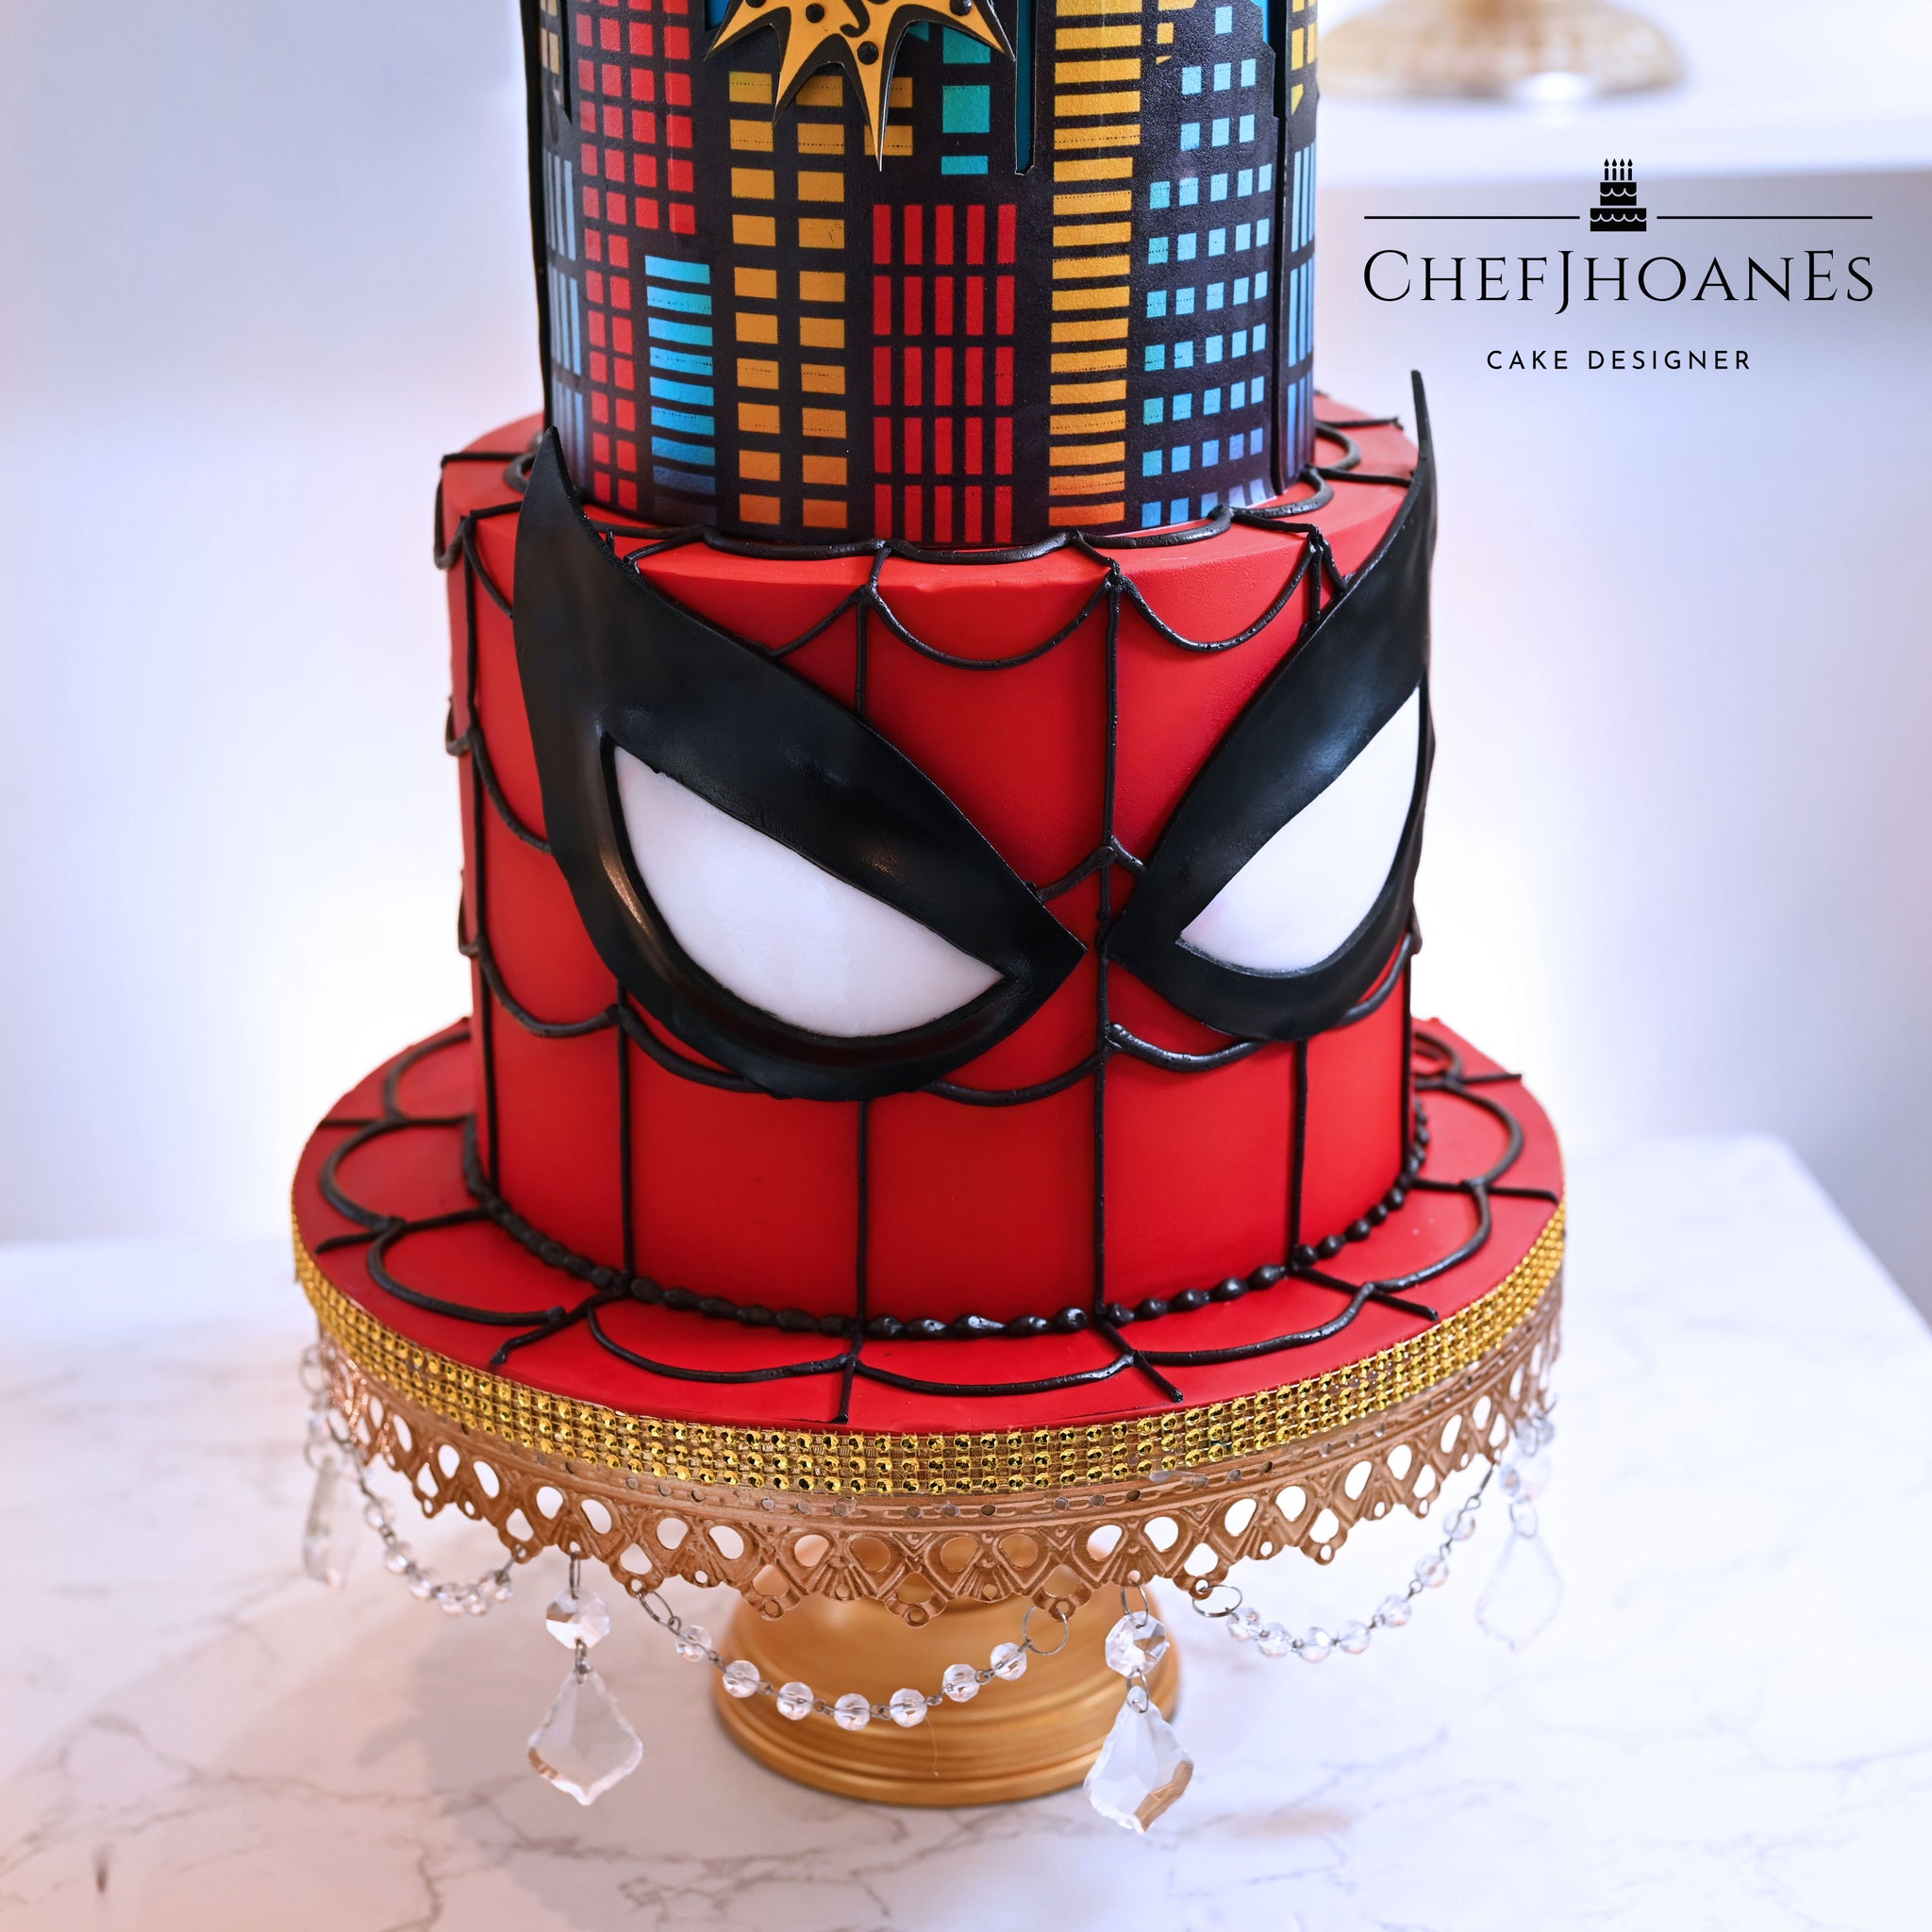 Spiderman Cake Designs and Images for Birthday Party